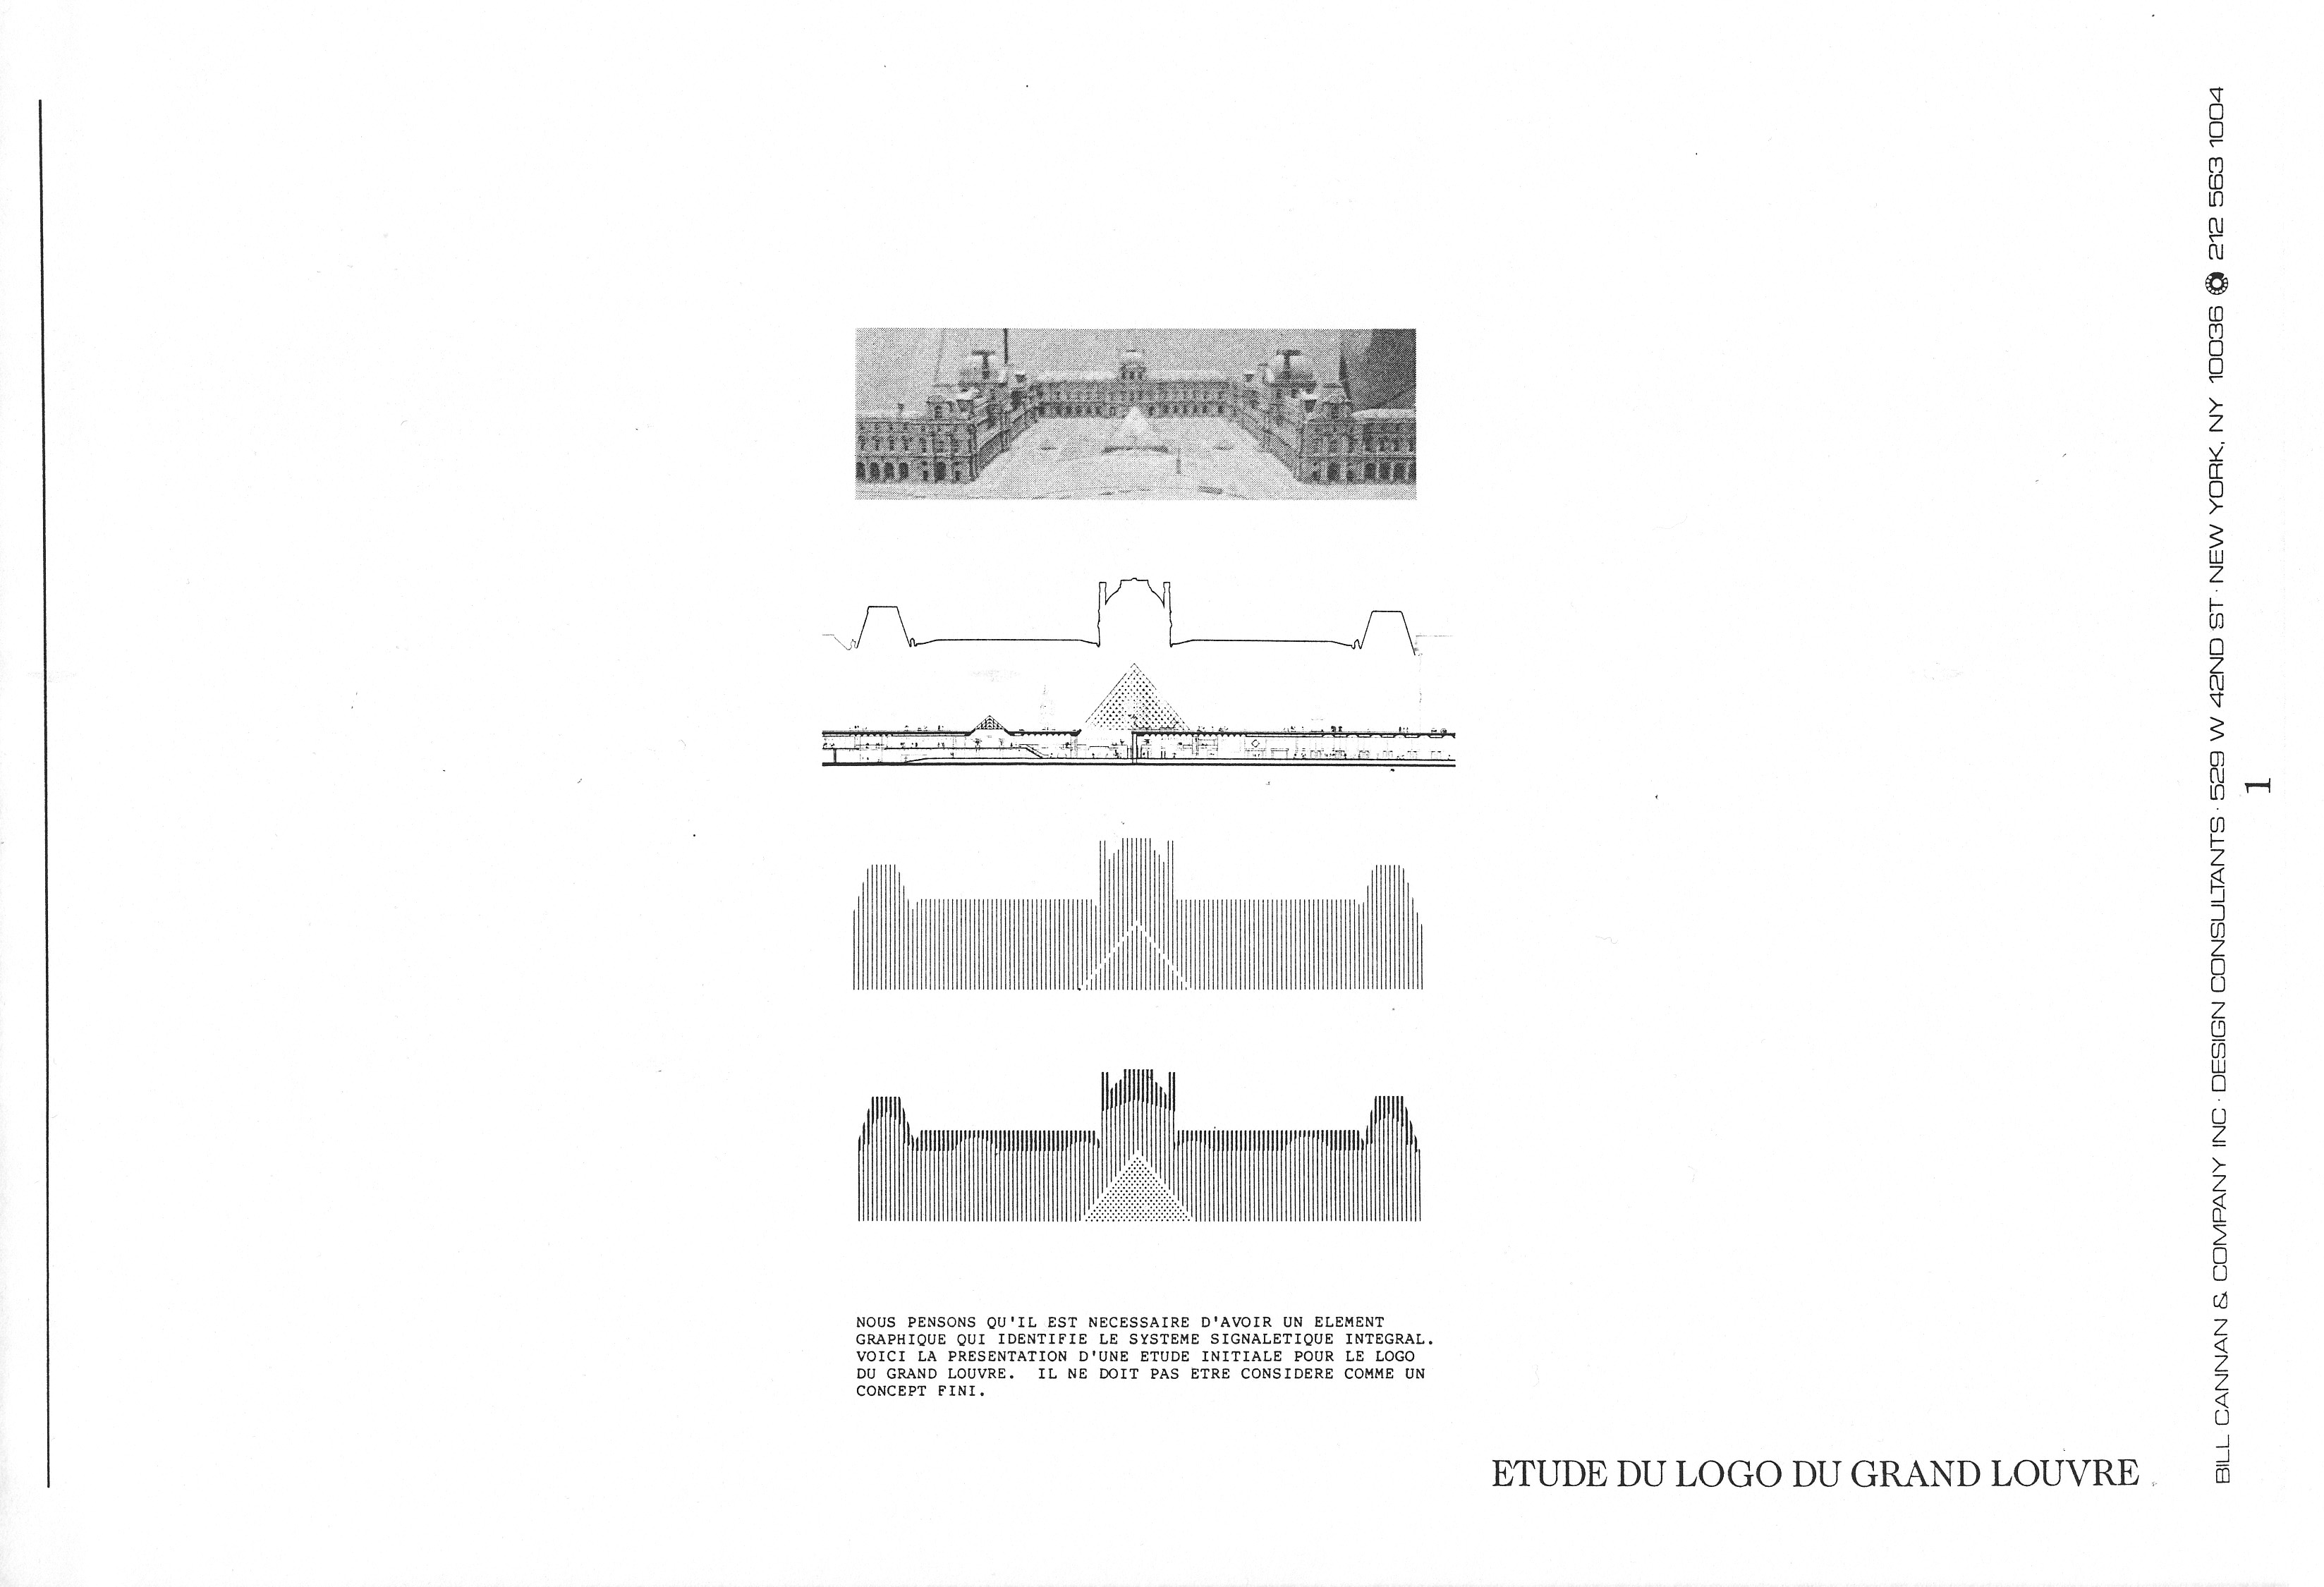 The cover of the Louvre Proposal Sketches Booklet, featuring the logo and dated August 12, 1986.